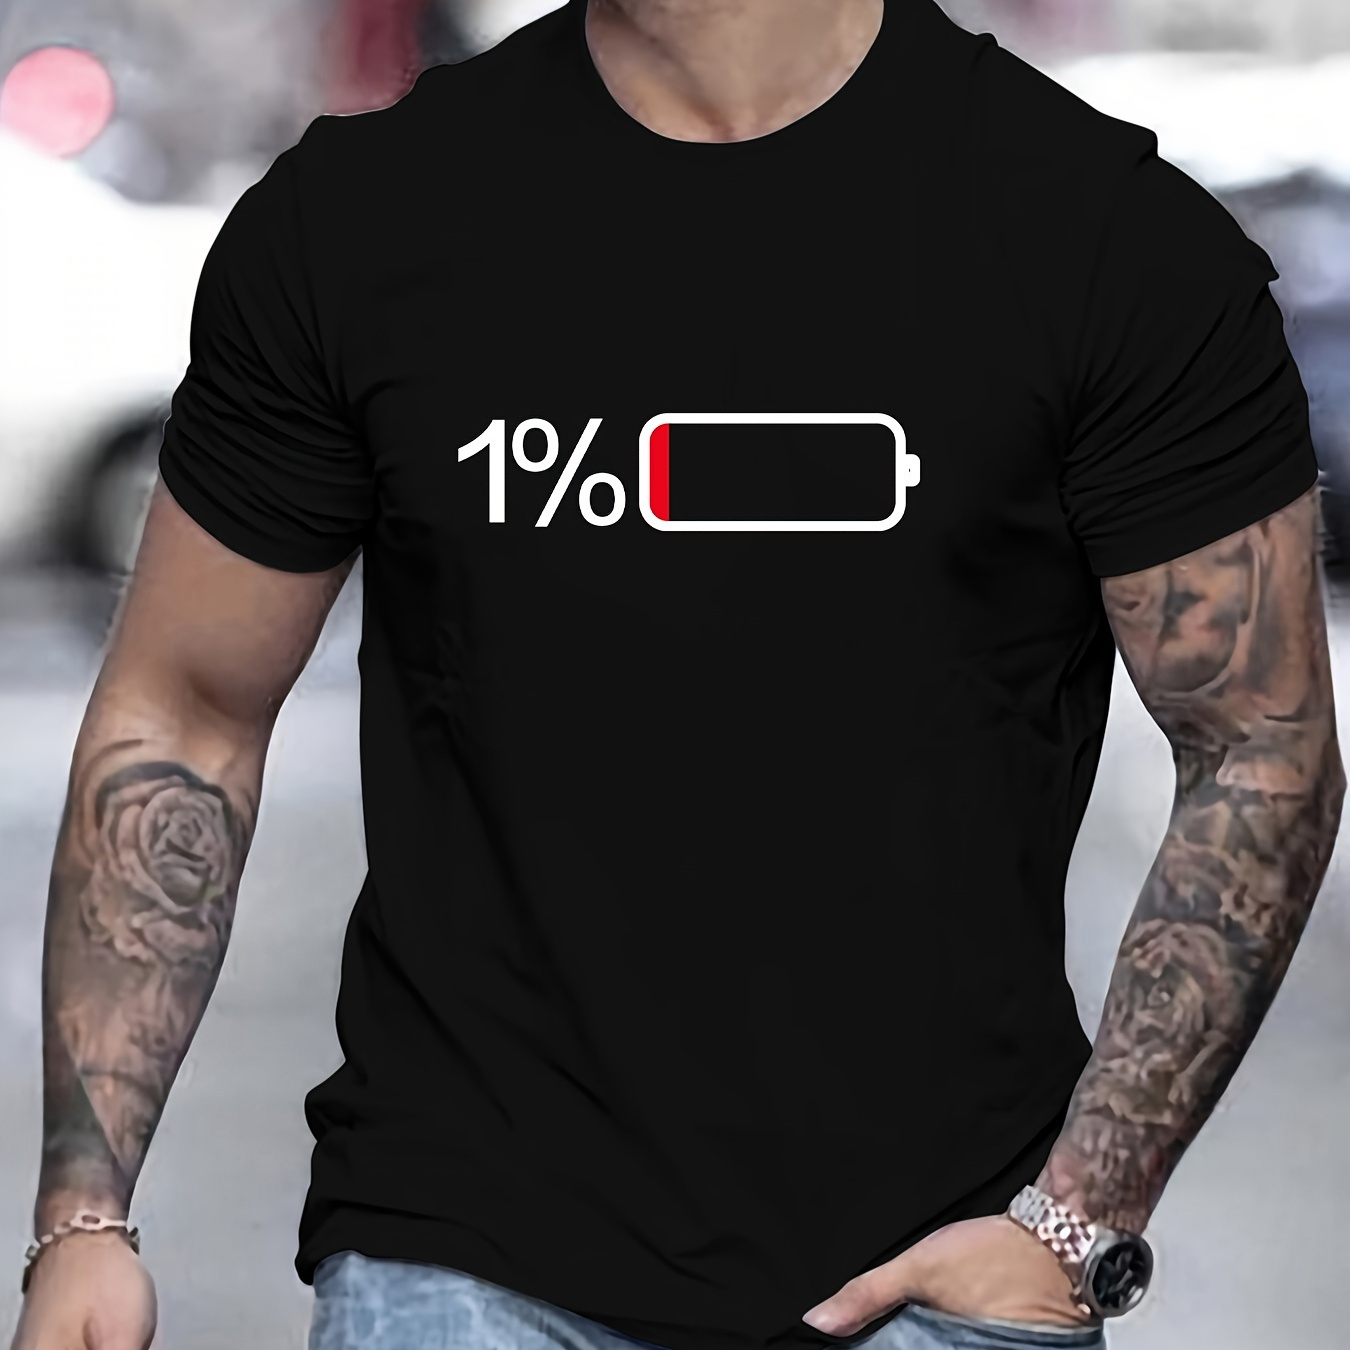 

1% Low Power Patterned Men's Casual Round Neck Short T-sleeves, Casual And Comfy Summer T-shirt For Daily Wear And Vacation Resorts